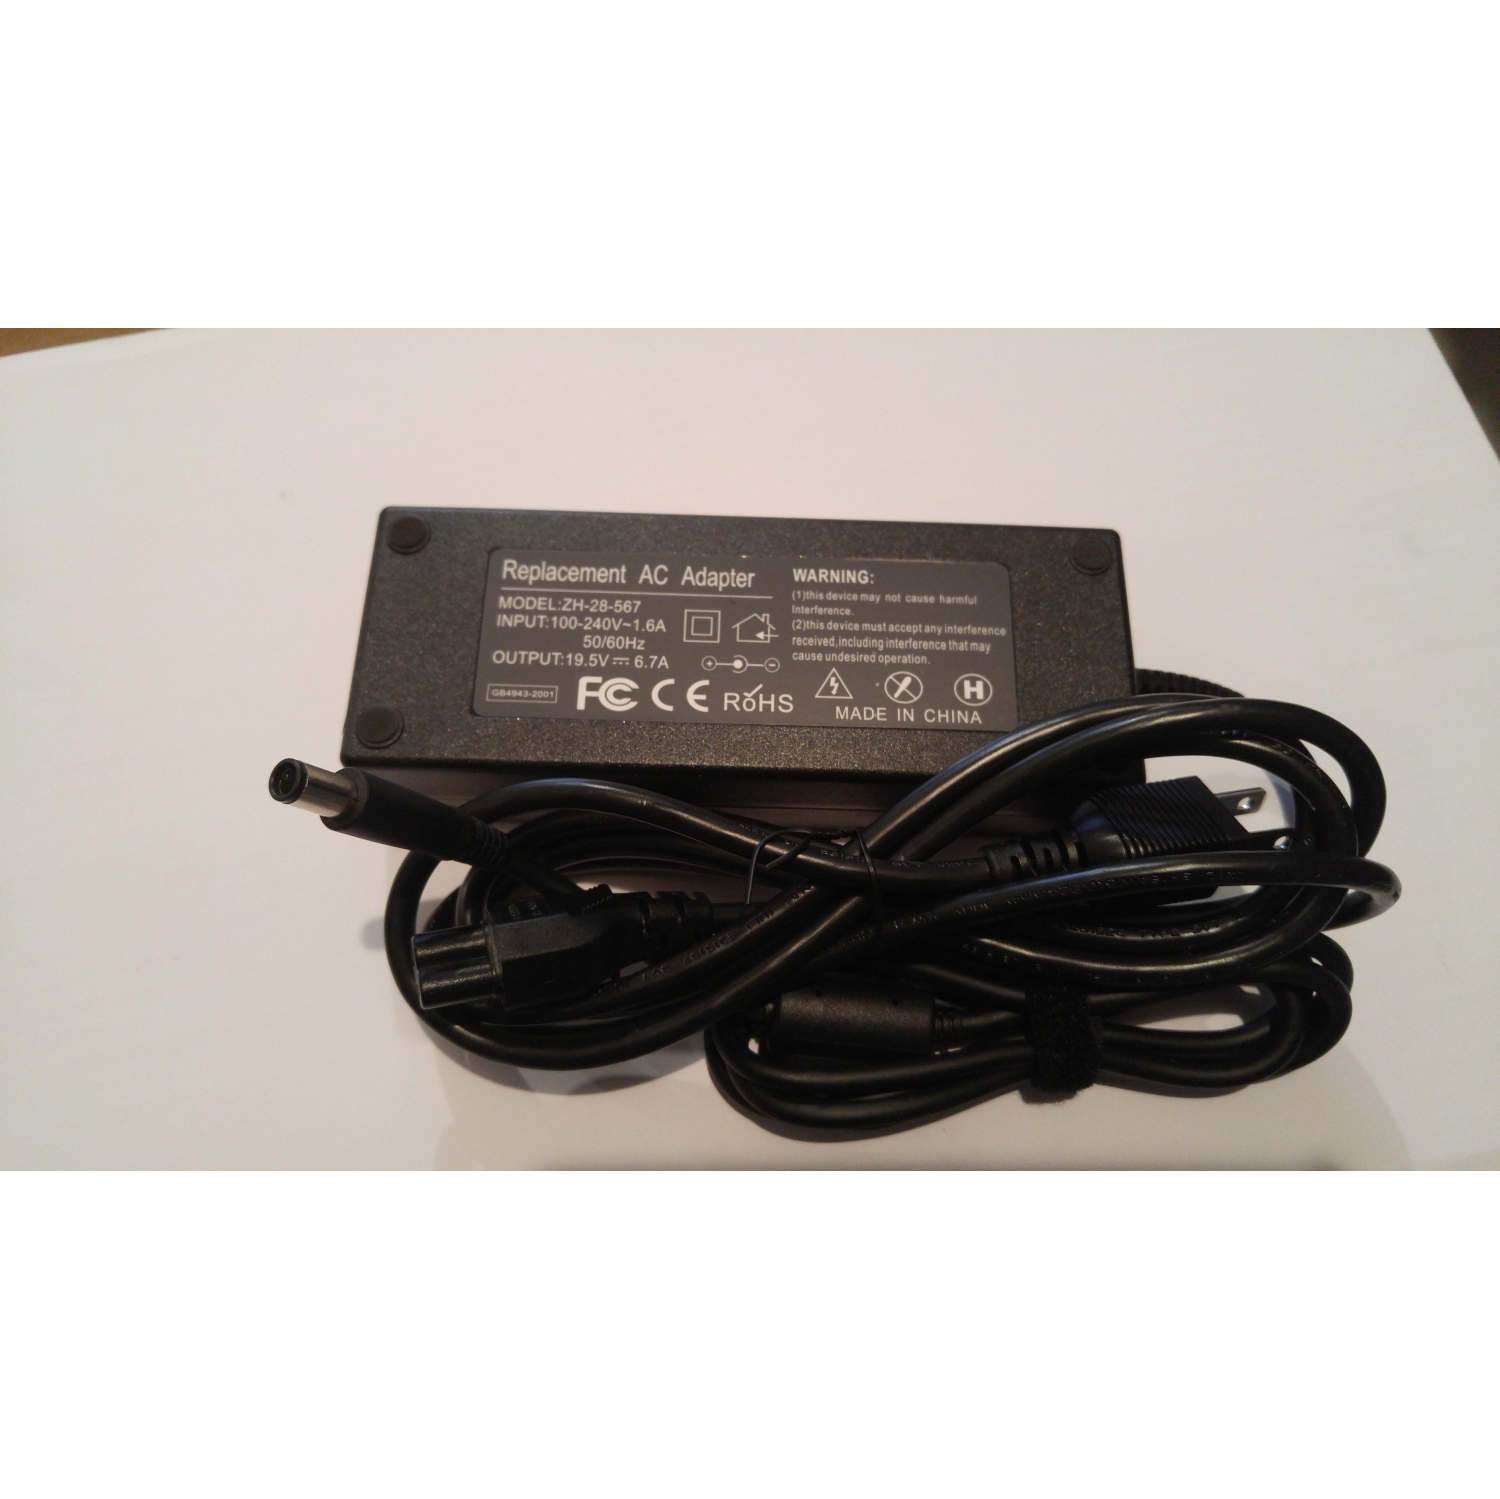 New Compatible Dell Inspiron 5150 5160 9300 Laptop AC Adapter Charger & Power Cord 130W